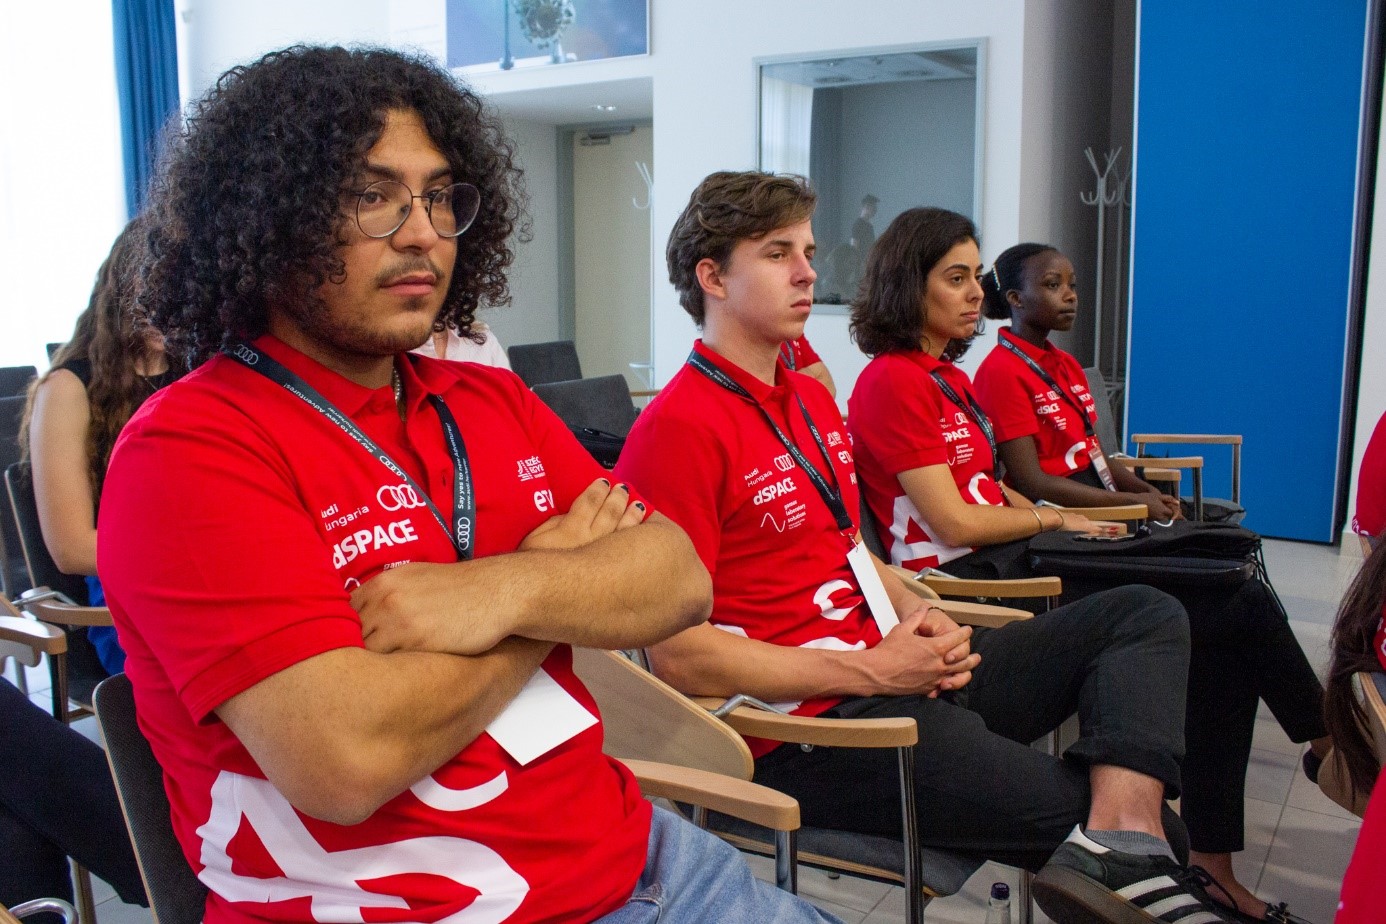 The Audi Development Camp puts Győr and Széchenyi István University on the international map. Students from 22 countries around the world have come to participate in the programme.